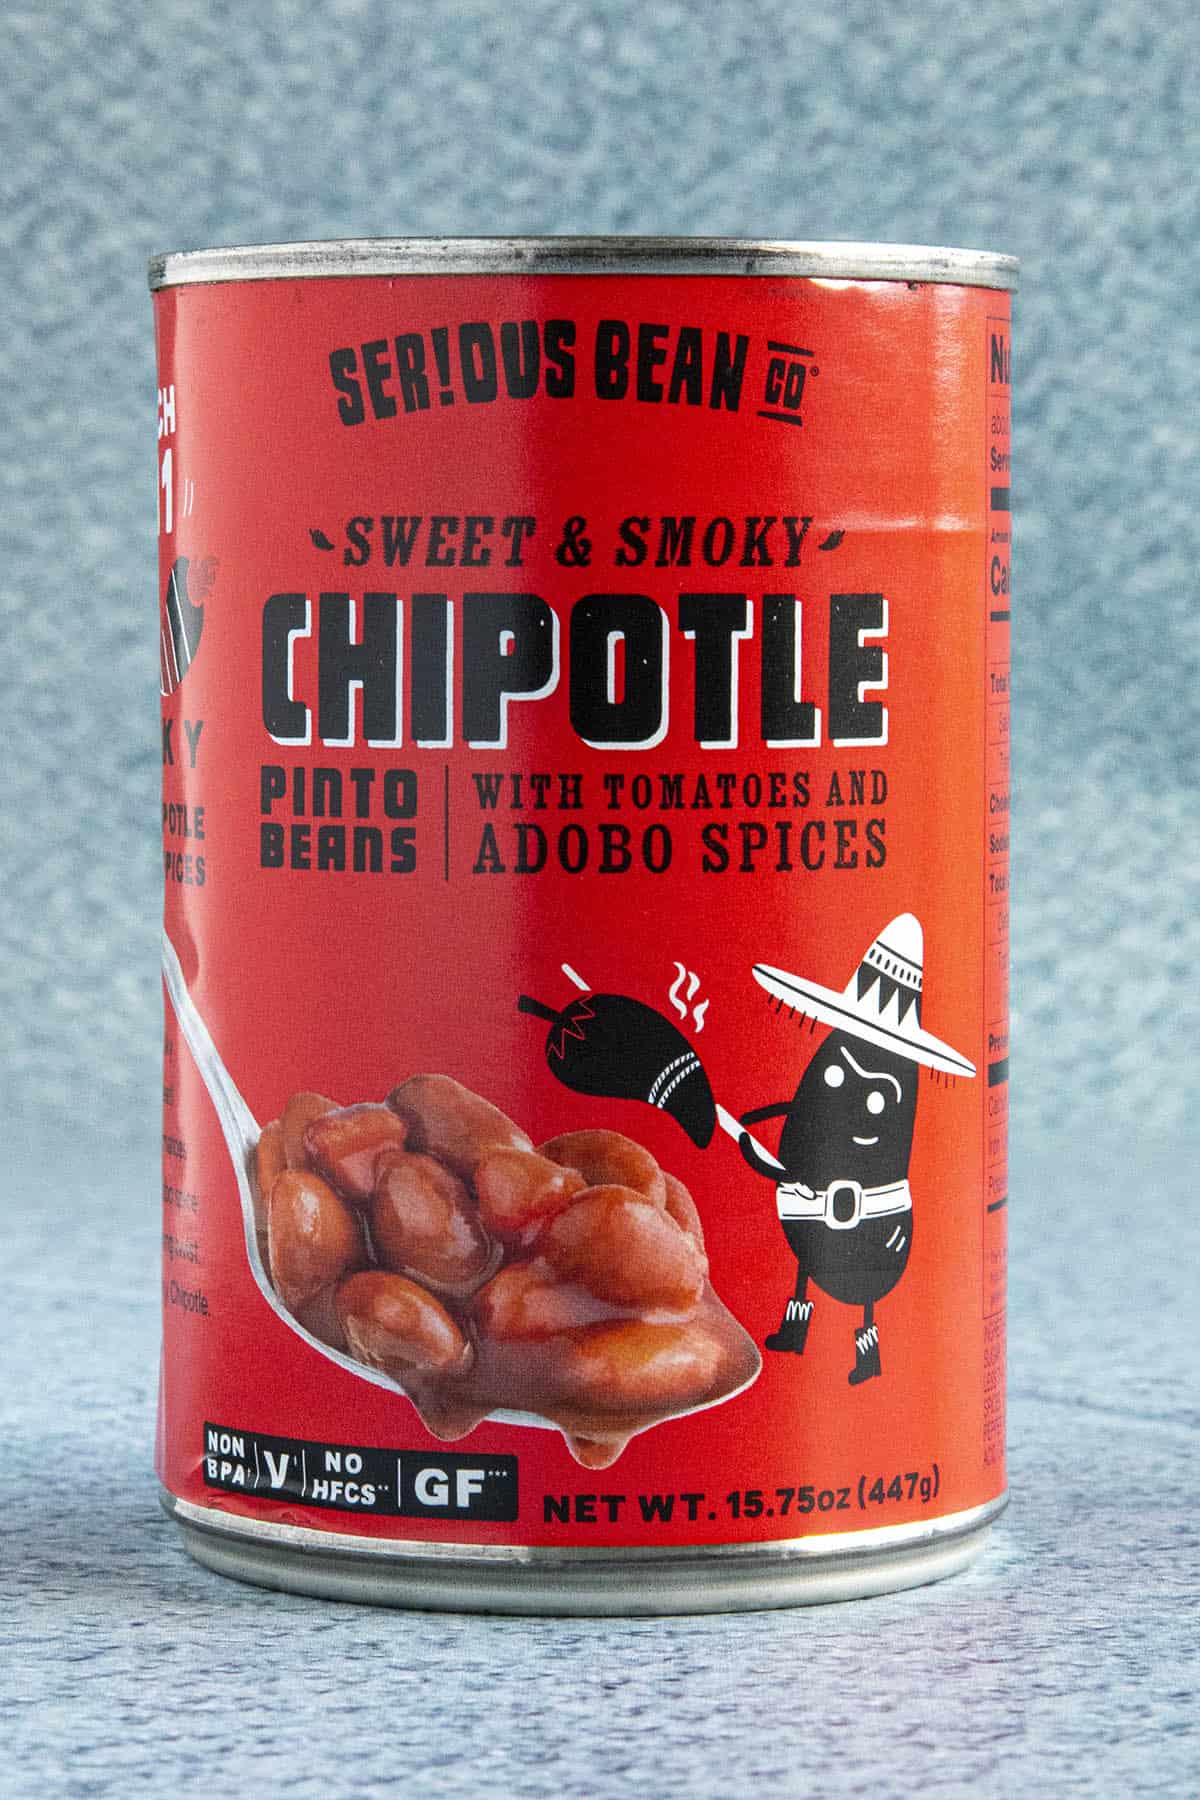 A can of Serious Bean Co. Sweet & Smoky Chipotle Pinto Beans with Tomatoes and Adobo Spices